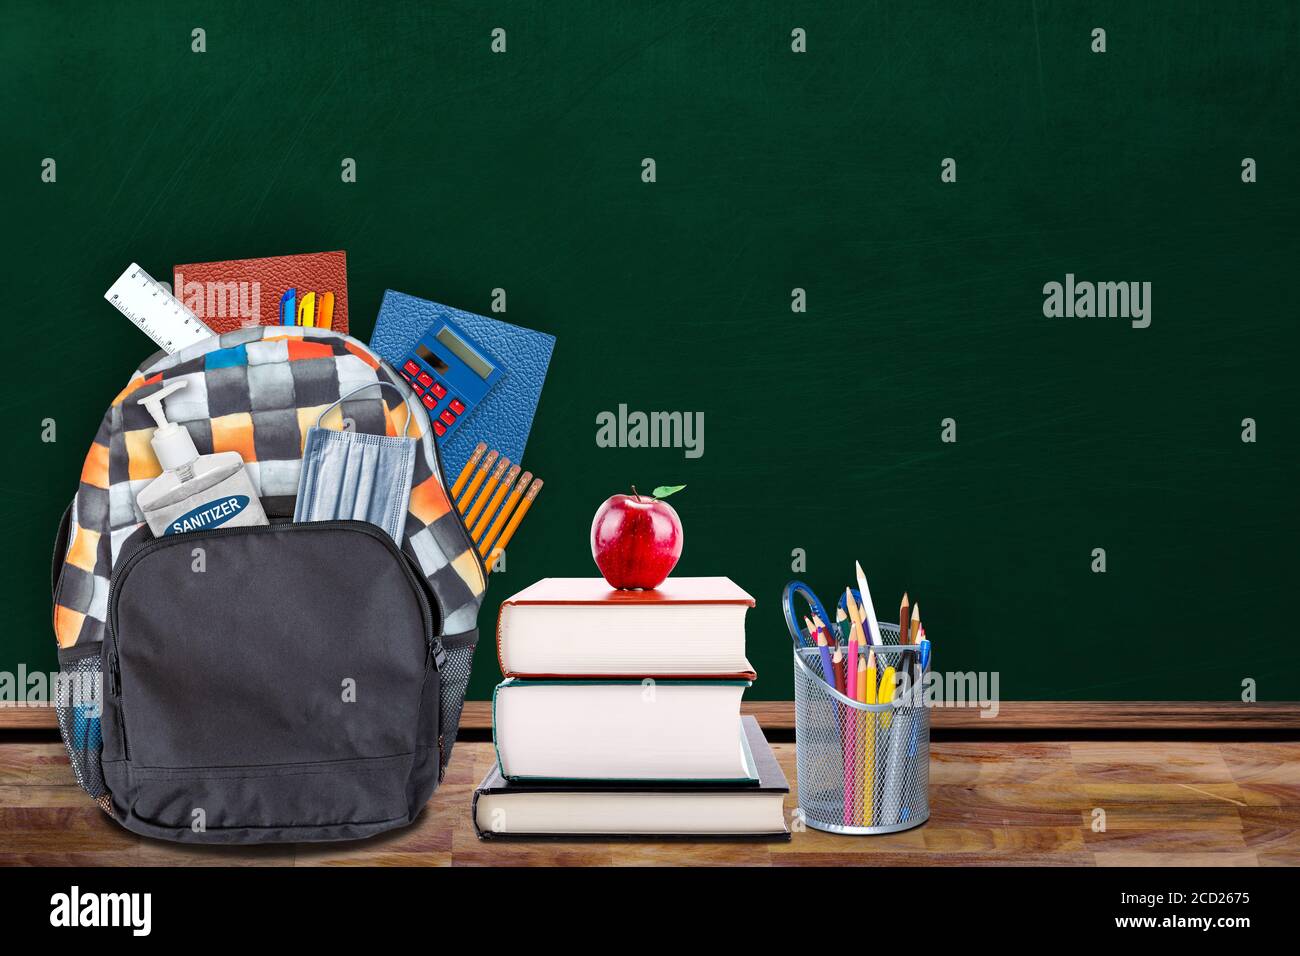 Education back-to-school concept in the new normal classroom setting showing backpack stuffed with stationery, hand sanitizer and face mask on table w Stock Photo